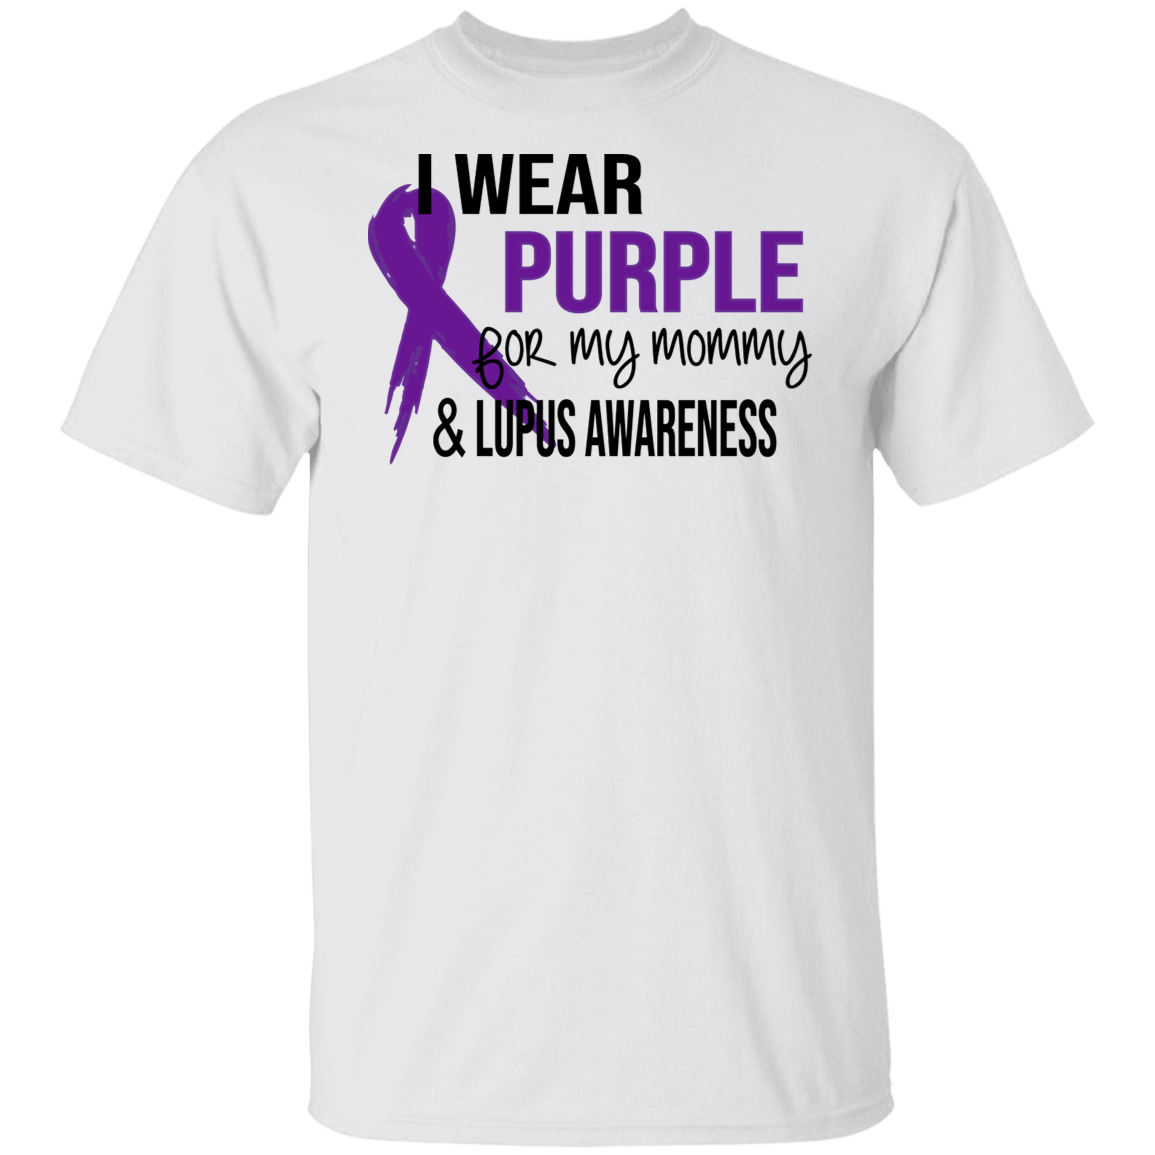 I Wear Purple for My Mommy